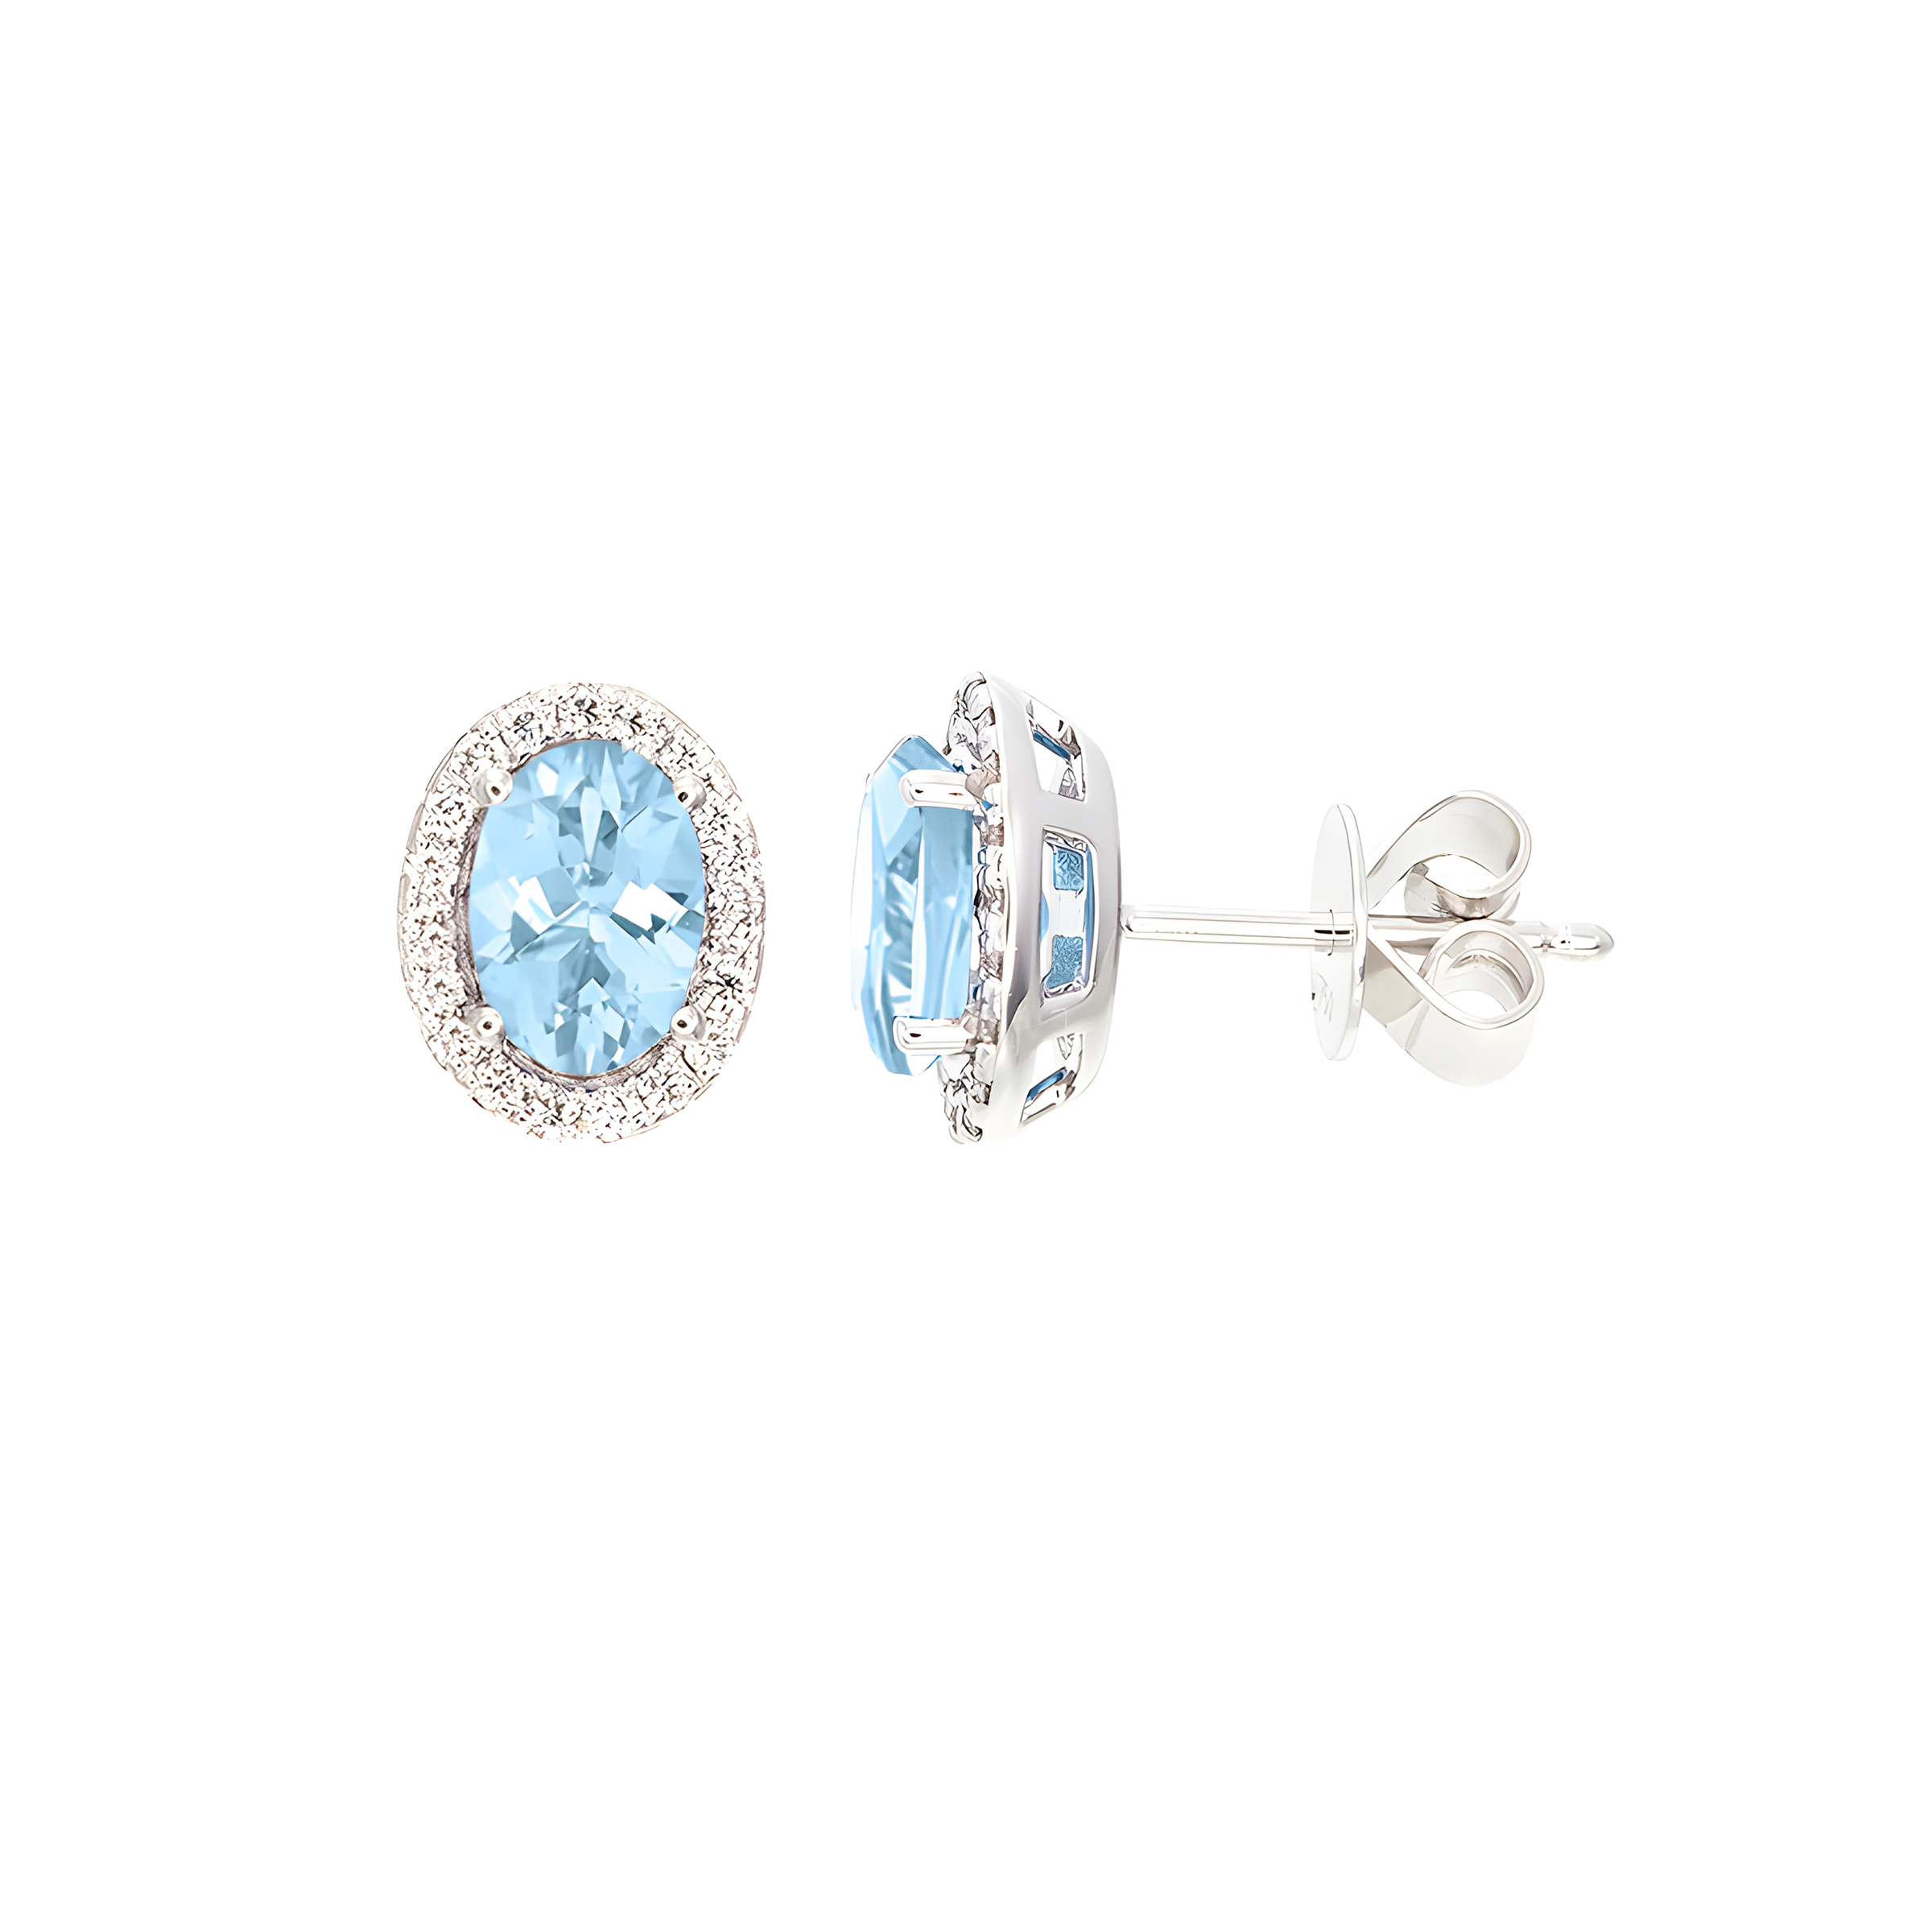 Oval Aquamarine And Diamond Halo Stud Earrings in 18k White Gold